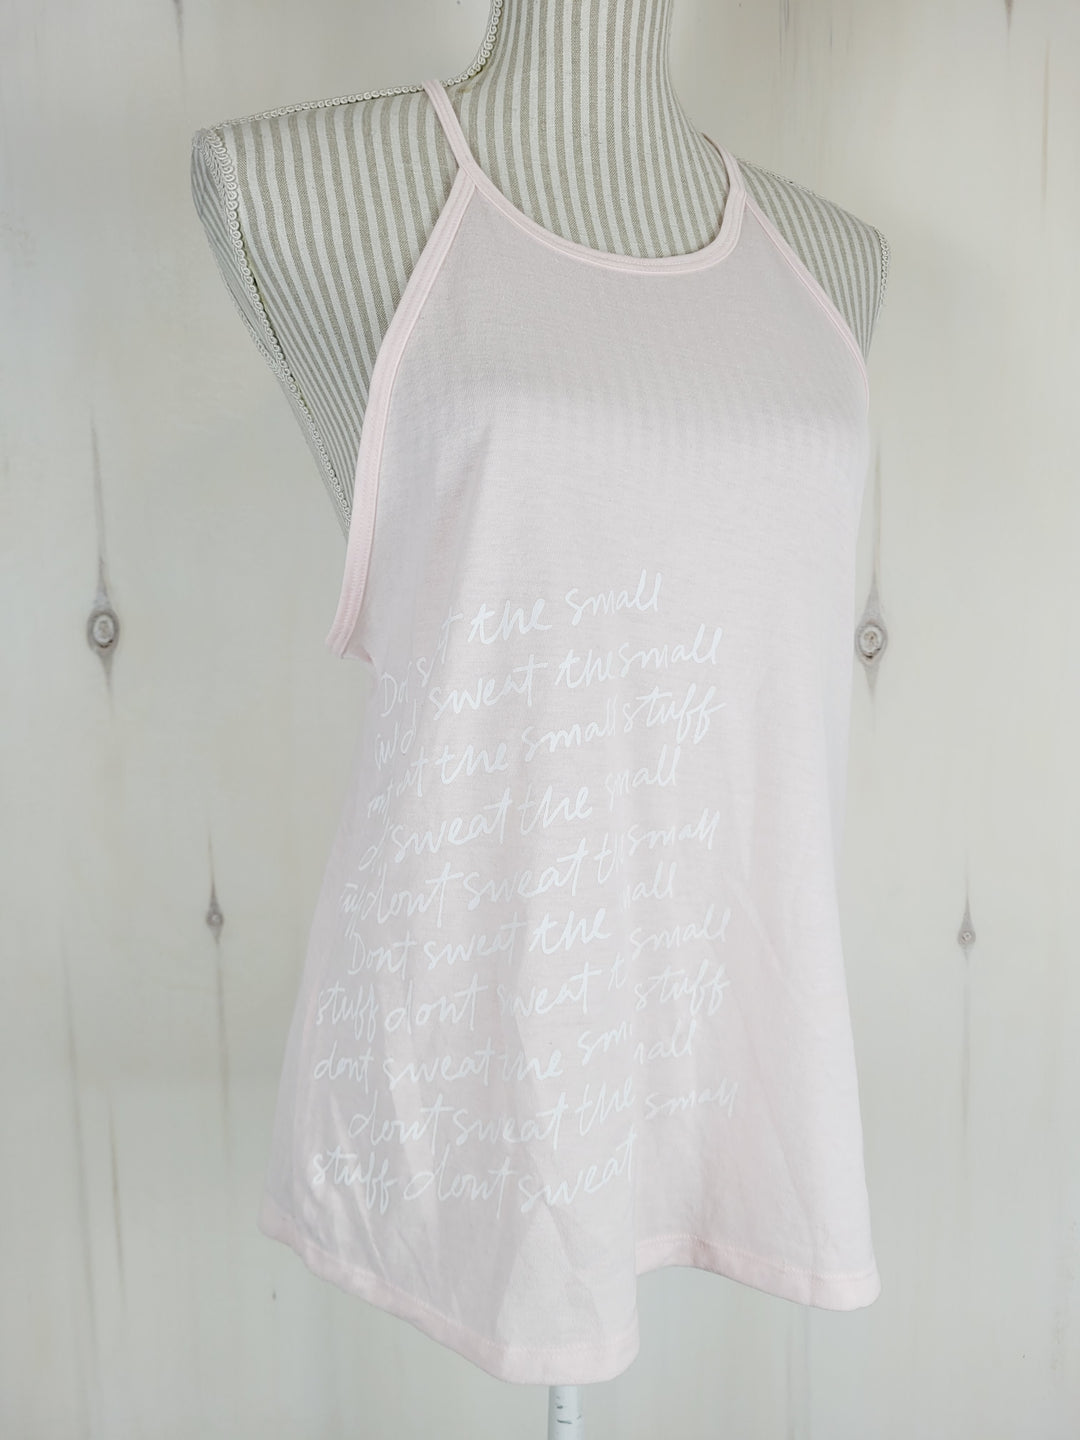 OLD NAVY GO-DRY ACTIVE PALE PINK TOP  LADIES SMALL EUC